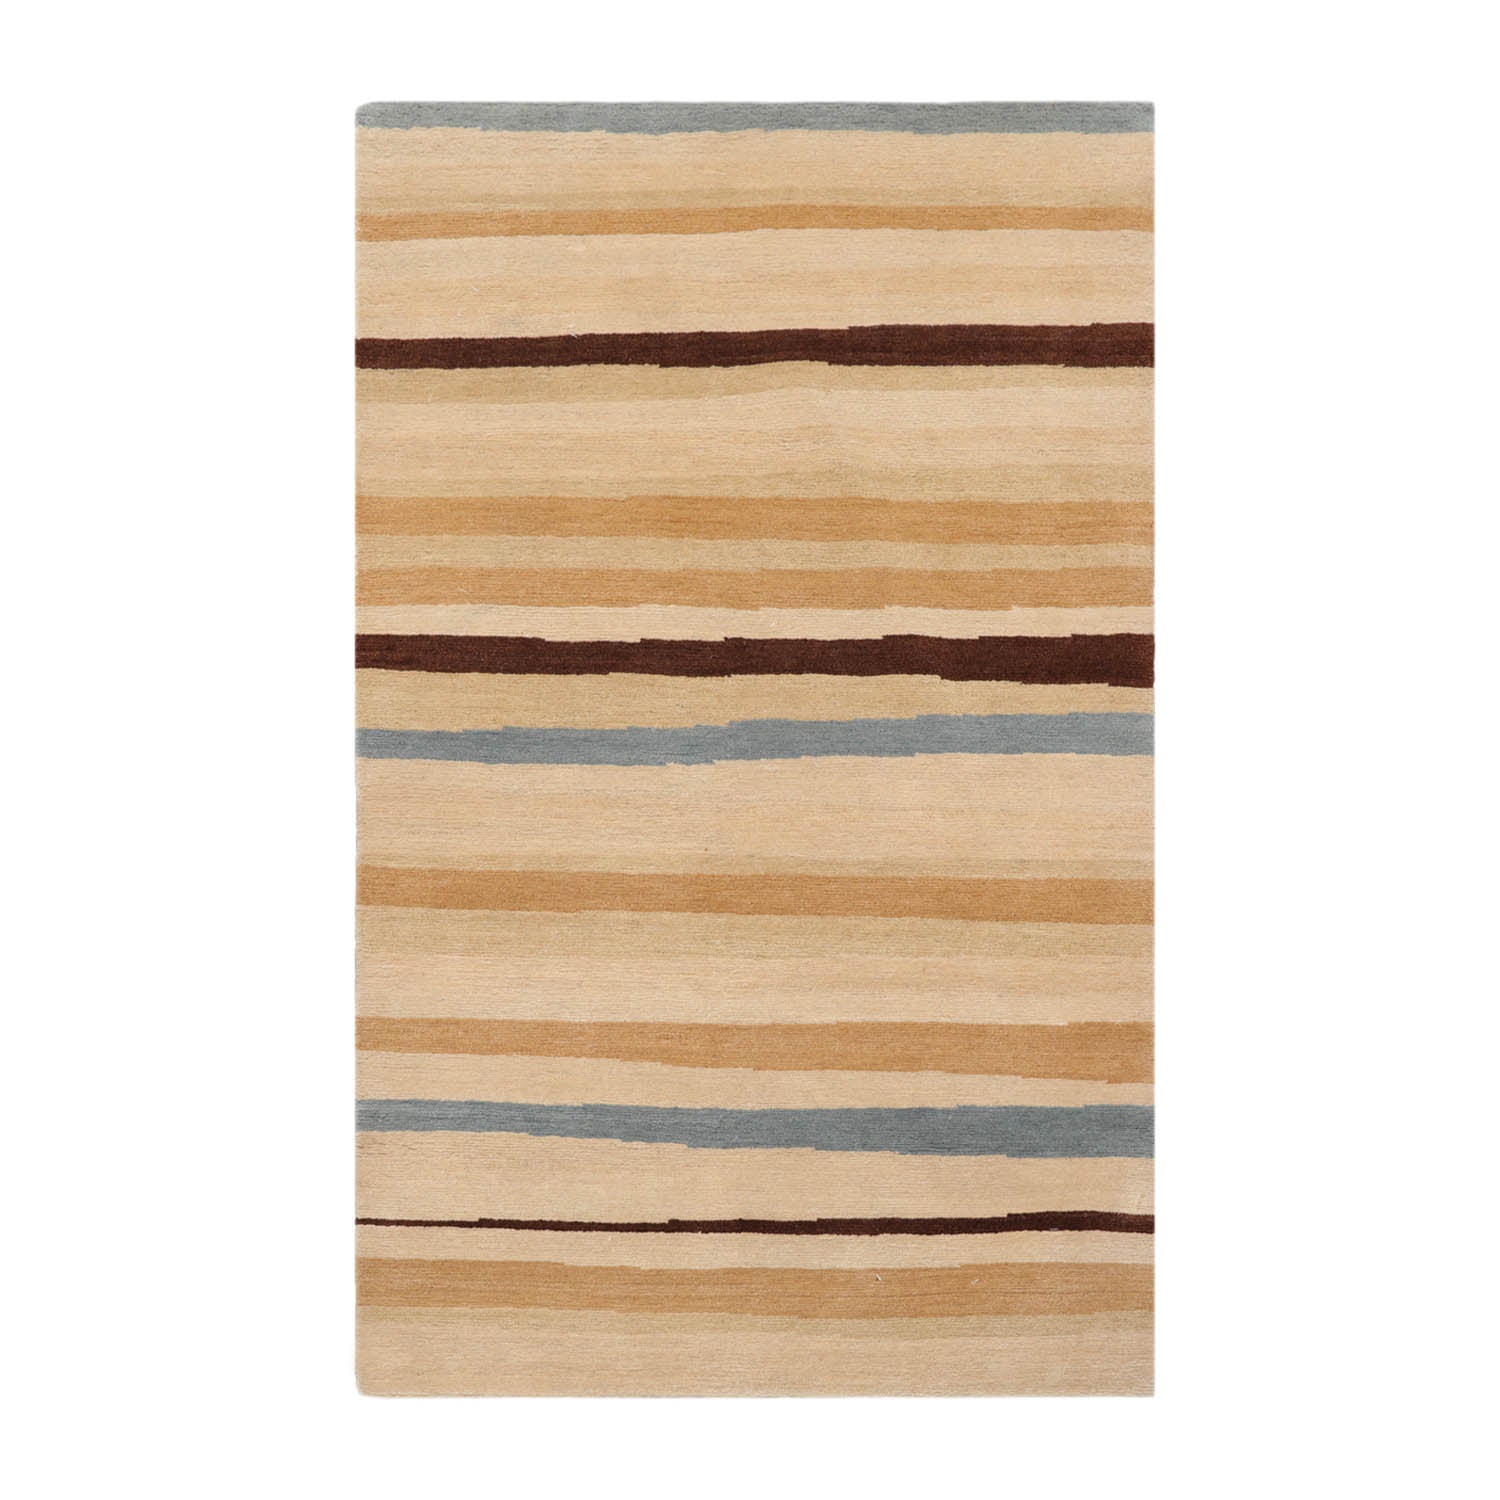 Tillotson 3x5 Hand-Knotted Contemporary  Striped Tibetan Wool Area Rug Beige